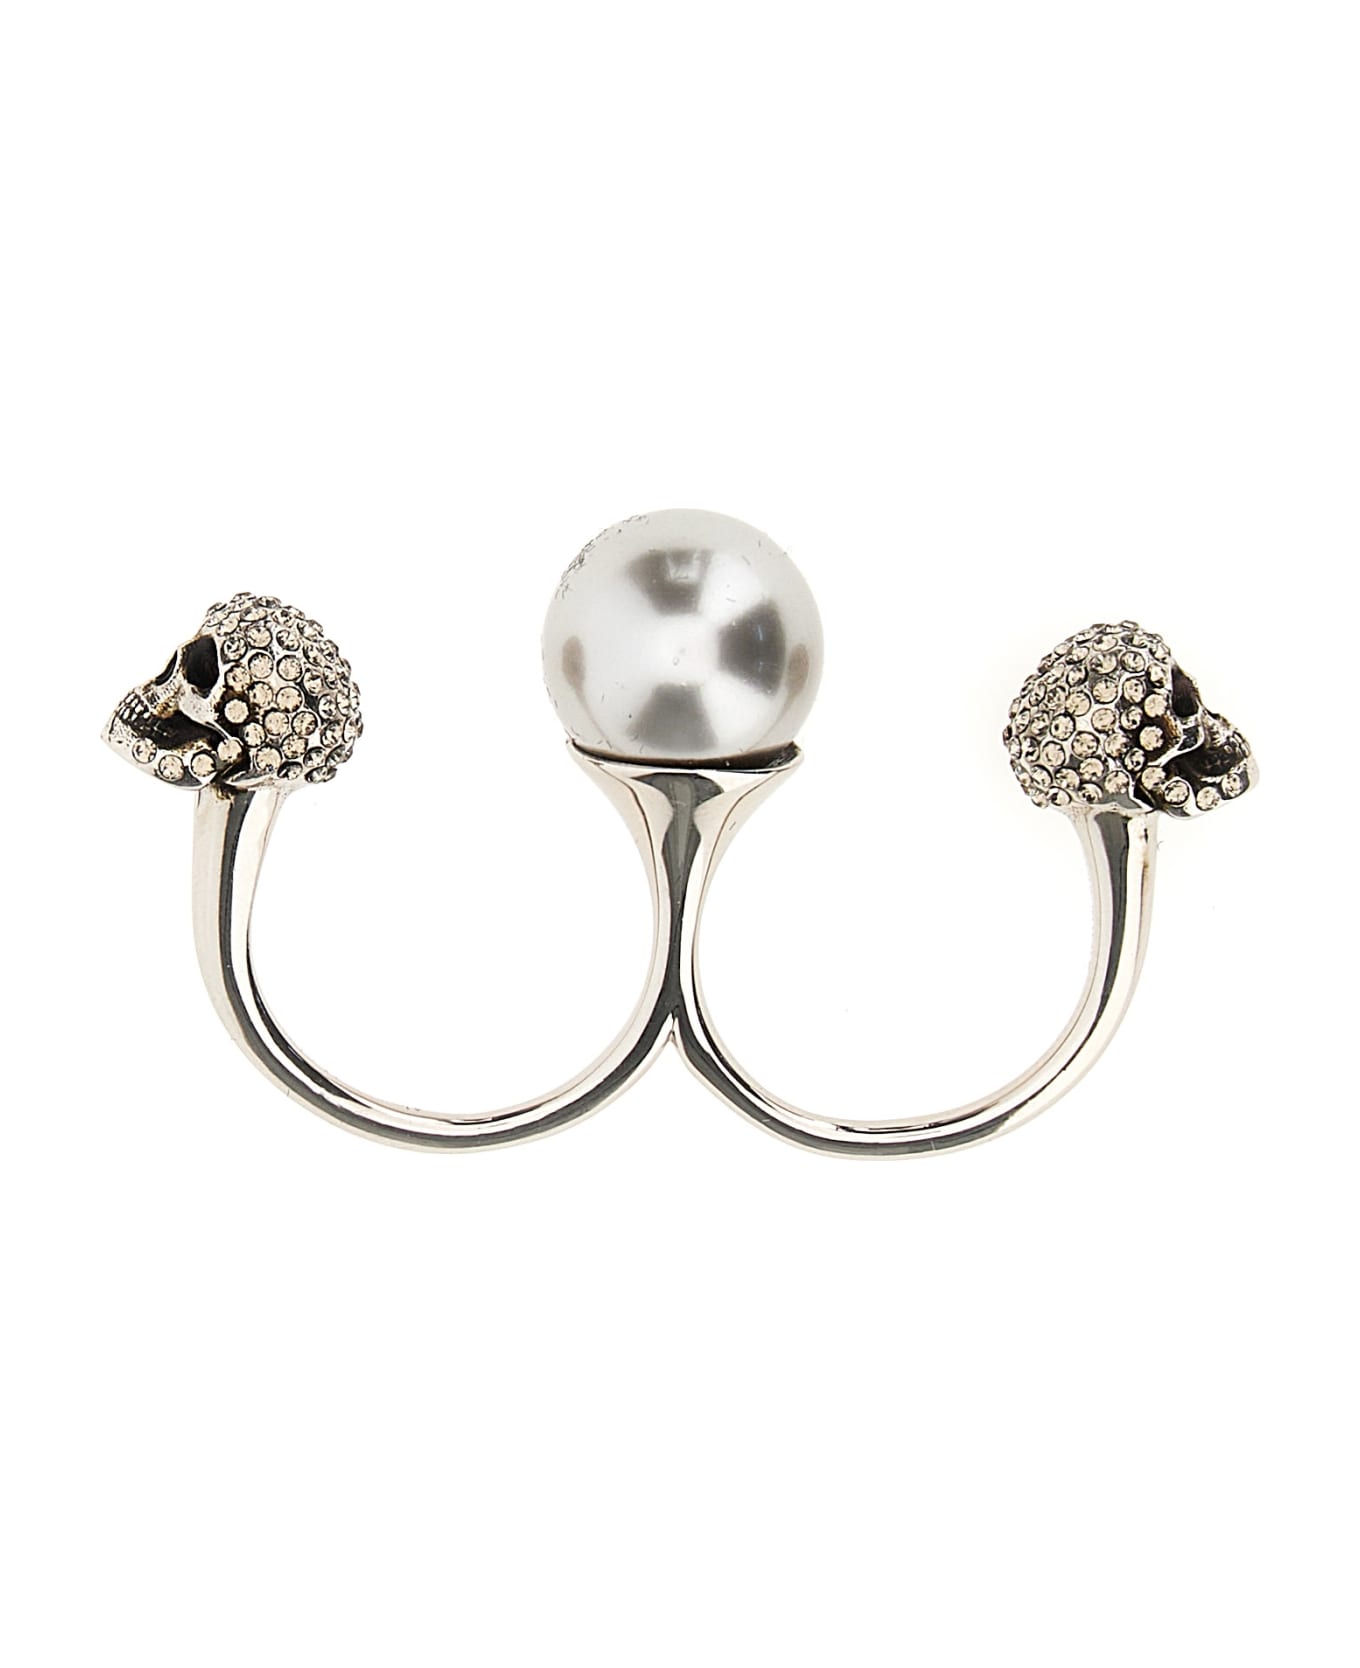 Alexander McQueen Antiqued Silver Double Pearl Skull Ring - Argento